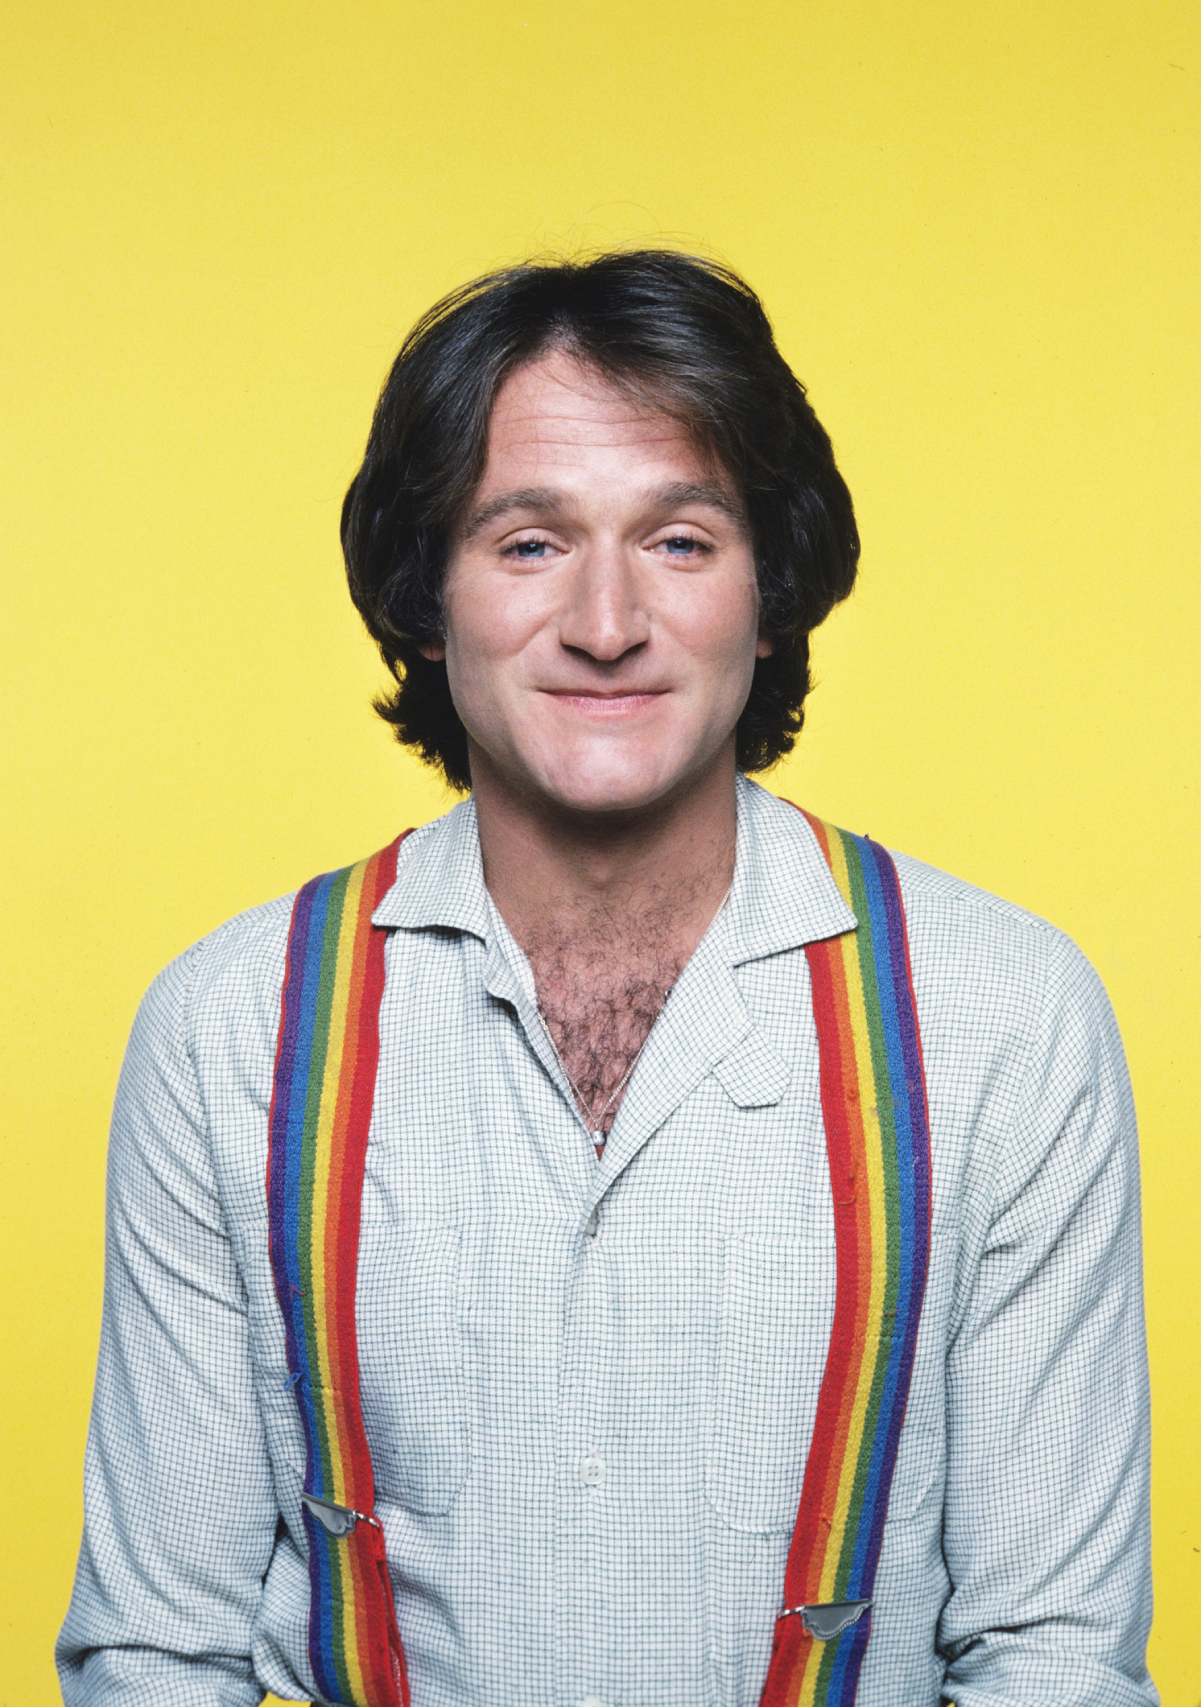 Robin Williams as Mork from Ork on 'Happy Days,' 1978